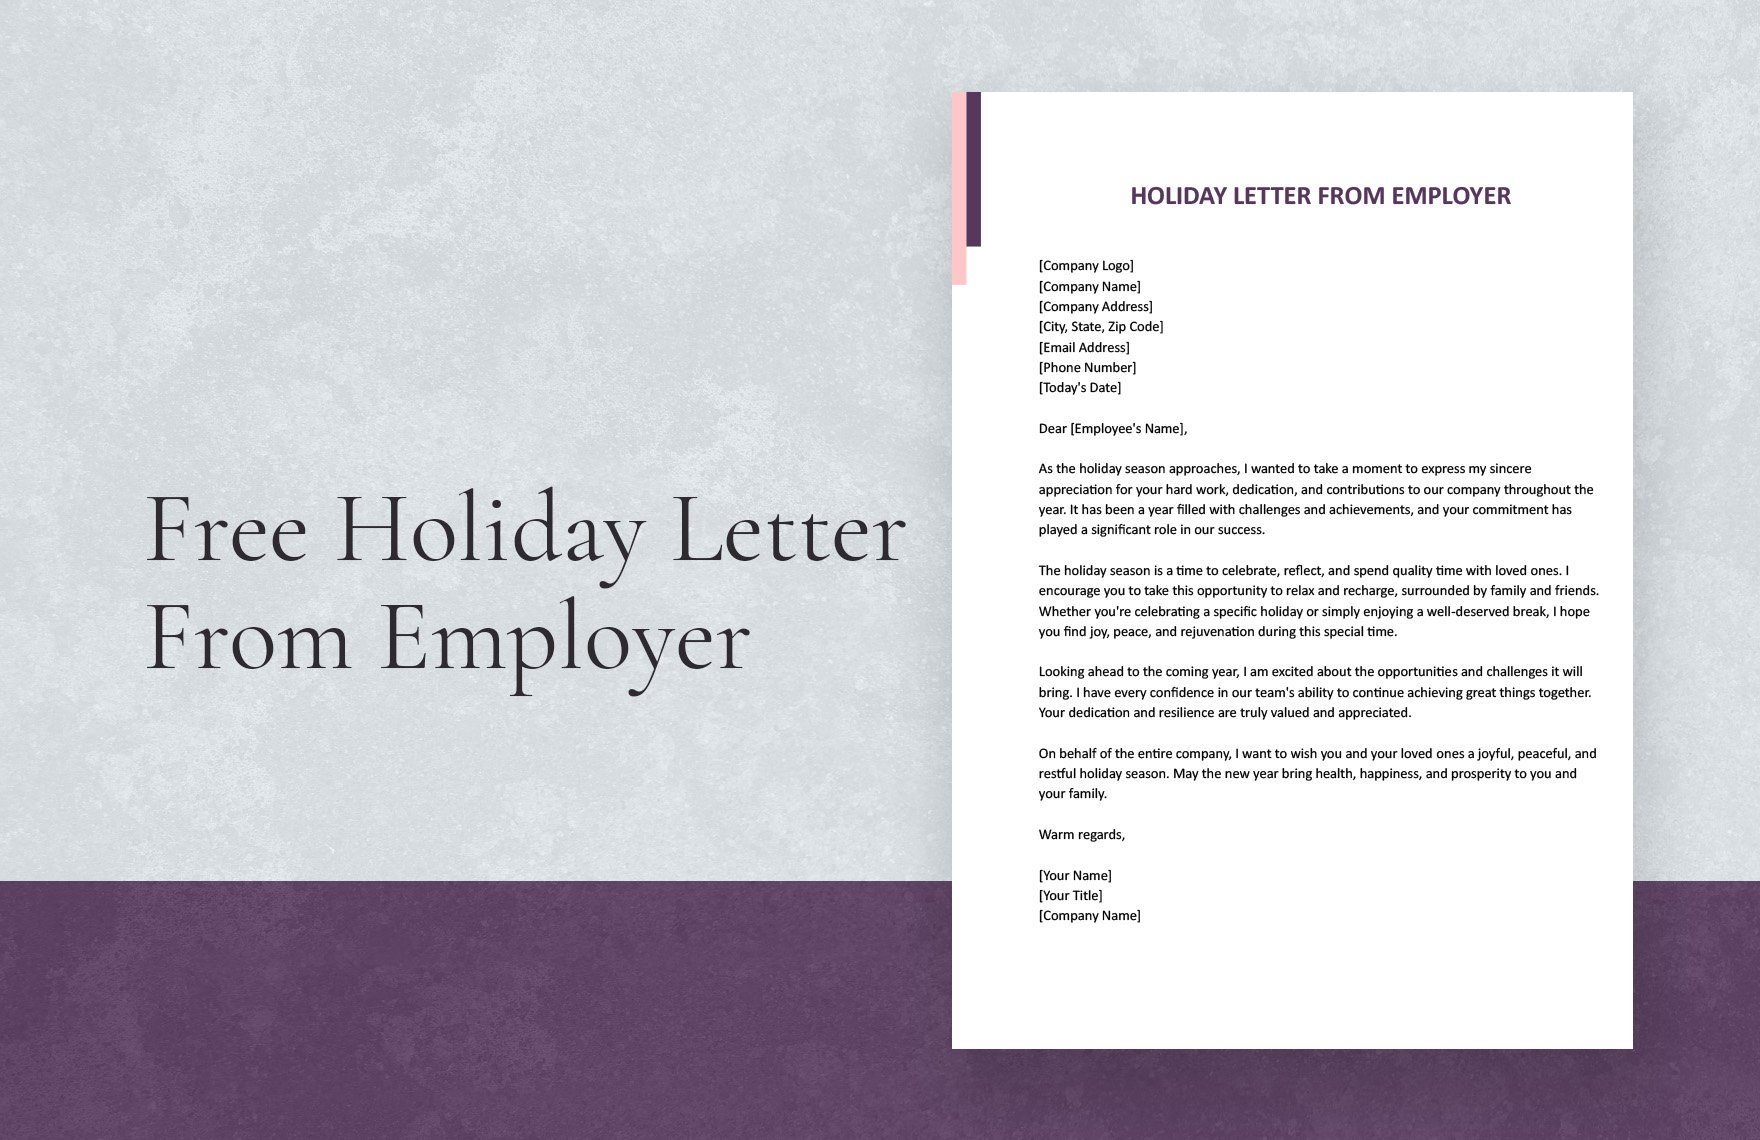 Holiday Letter From Employer